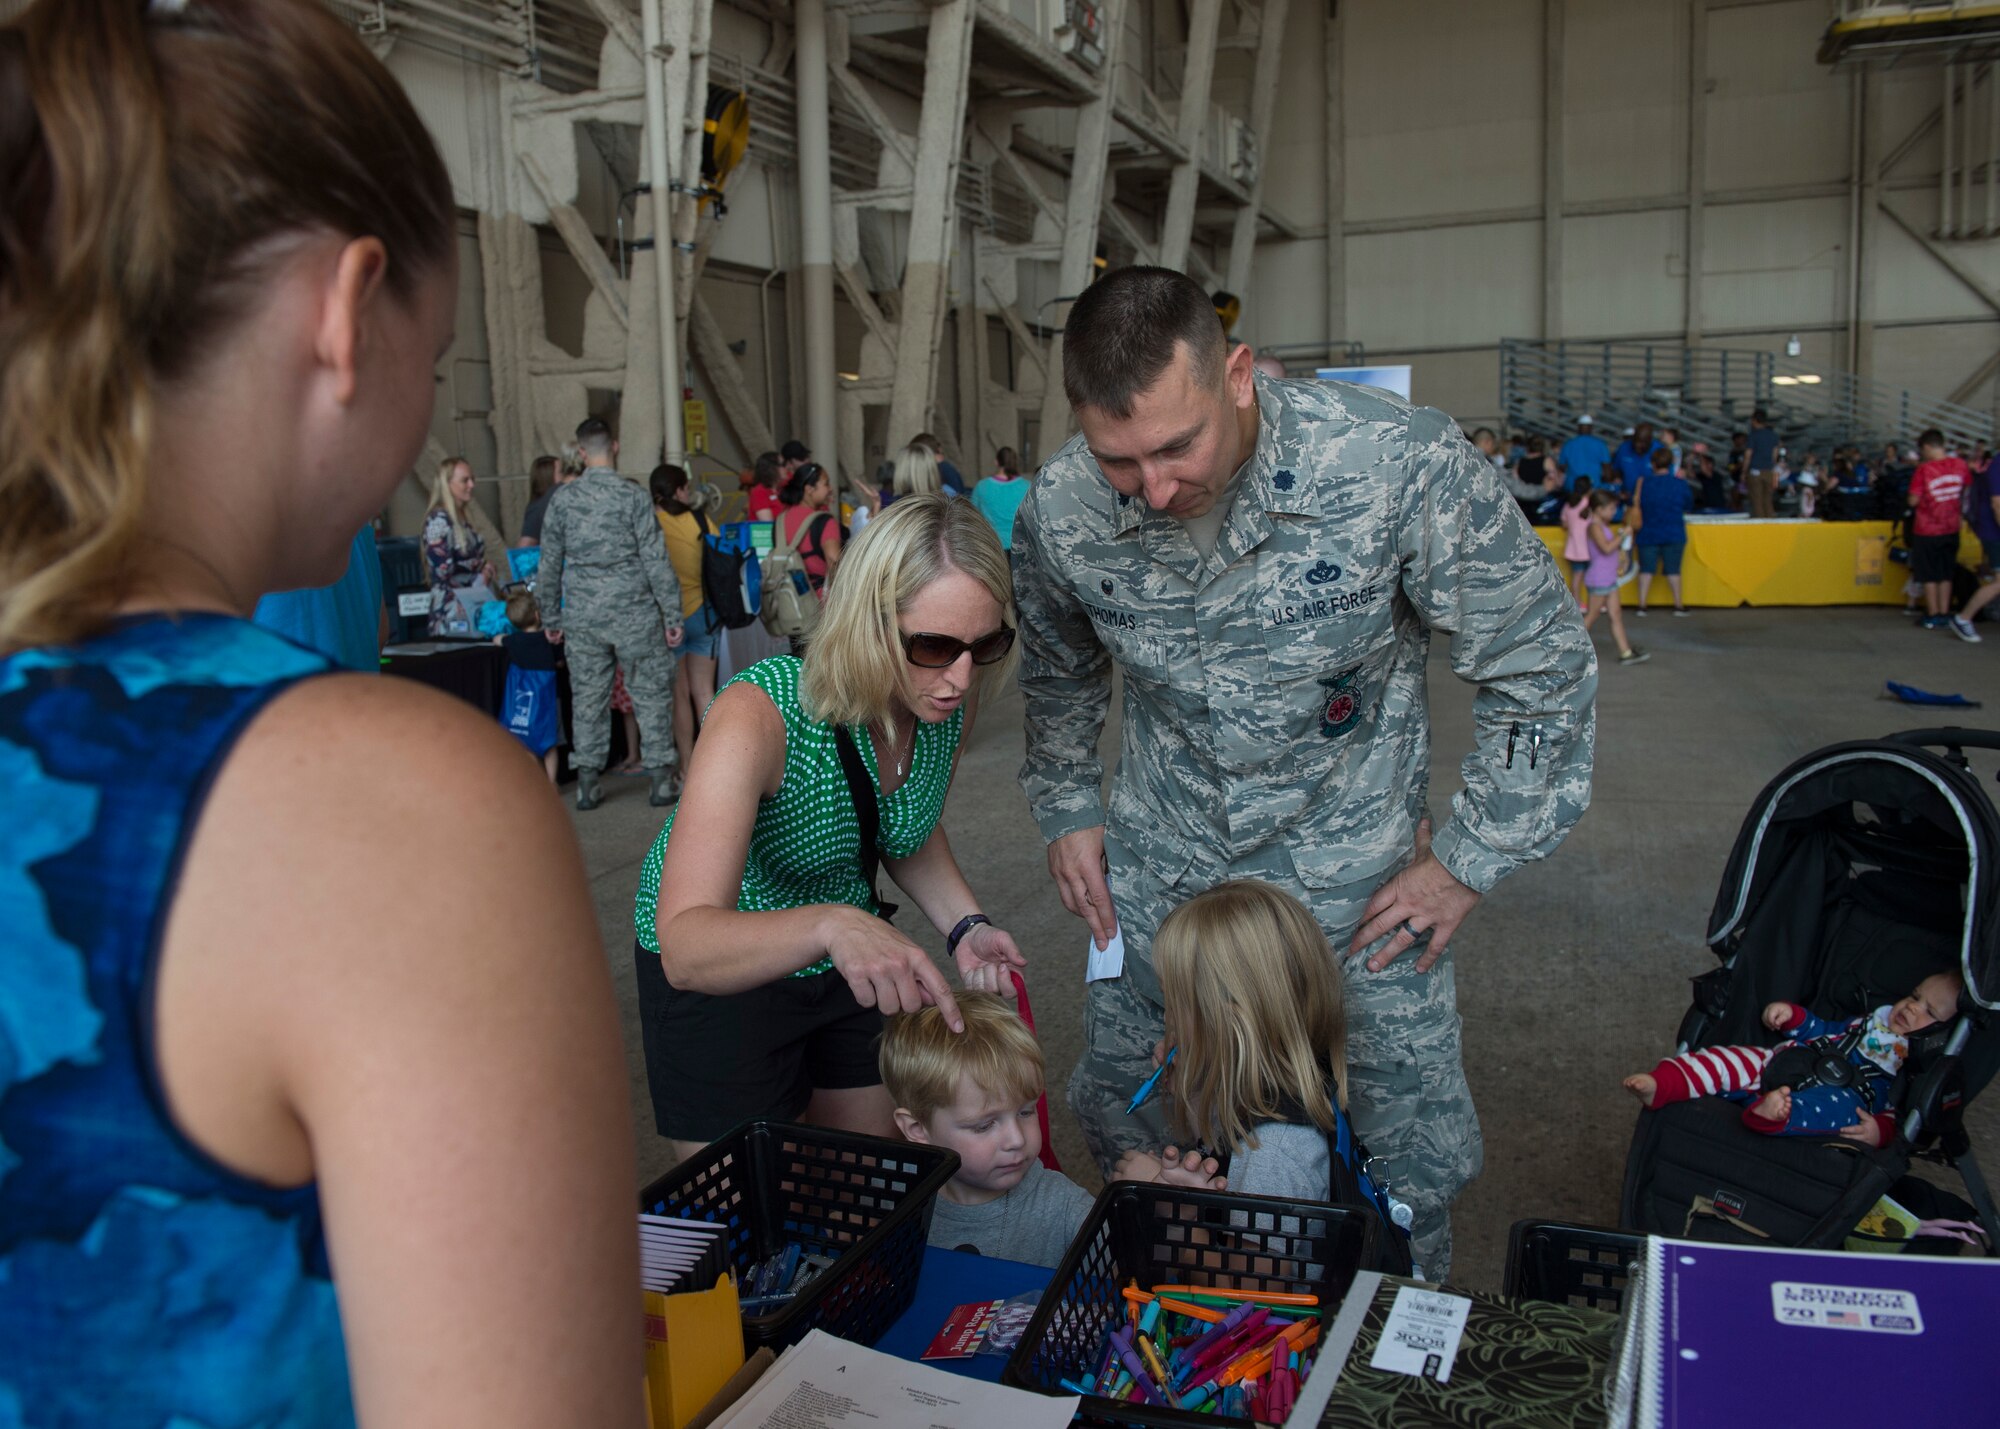 U.S. Air Force Lt. Col. Steven Thomas, a commander assigned to the 97th Civil Engineering Squadron, shops for school supplies with his family during the Kids Deployment Line, August 2, 2018, at Altus Air Force Base, Okla.